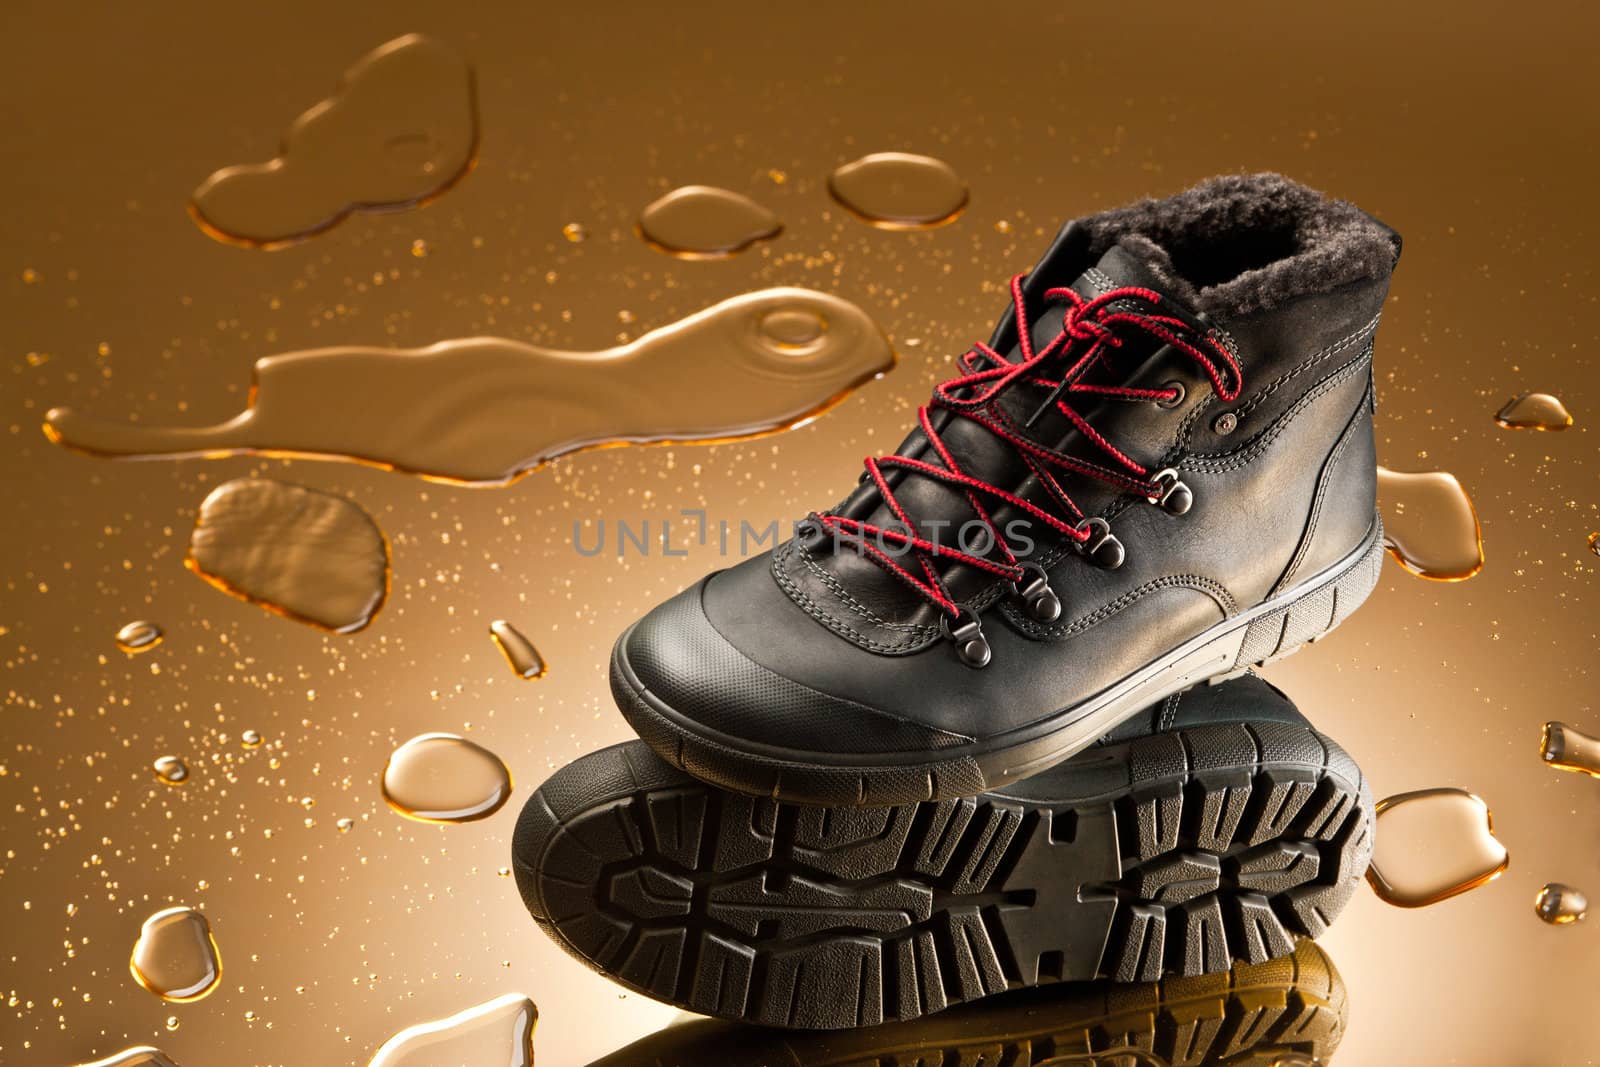 black winter shoes over golden background with water drops